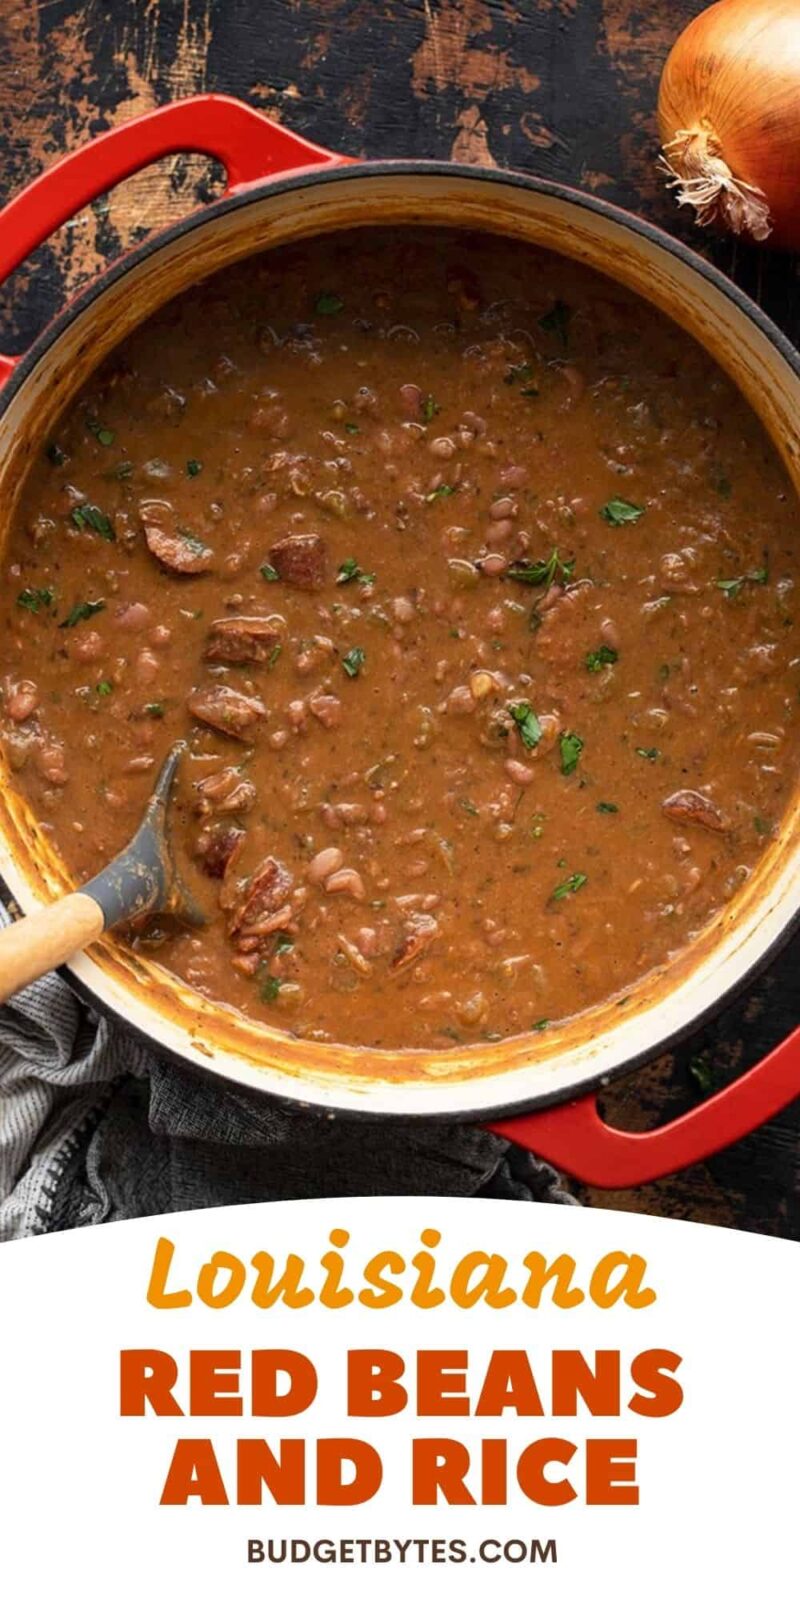 A pot of red beans and rice with title text at the bottom